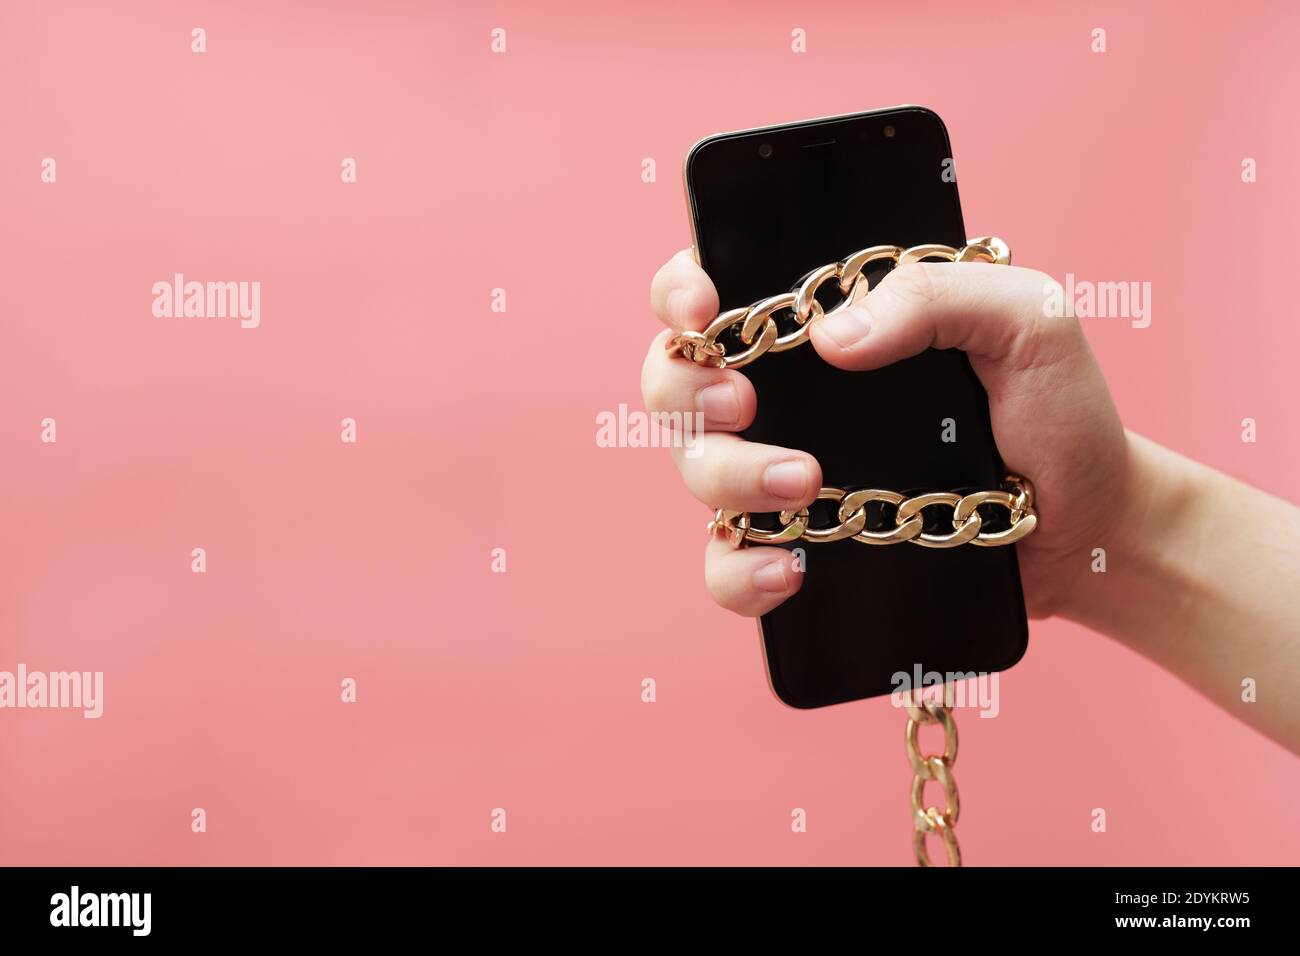 Phone addiction, social networks concept, tied to hand with a chain smartphone on a pink background Stock Photo